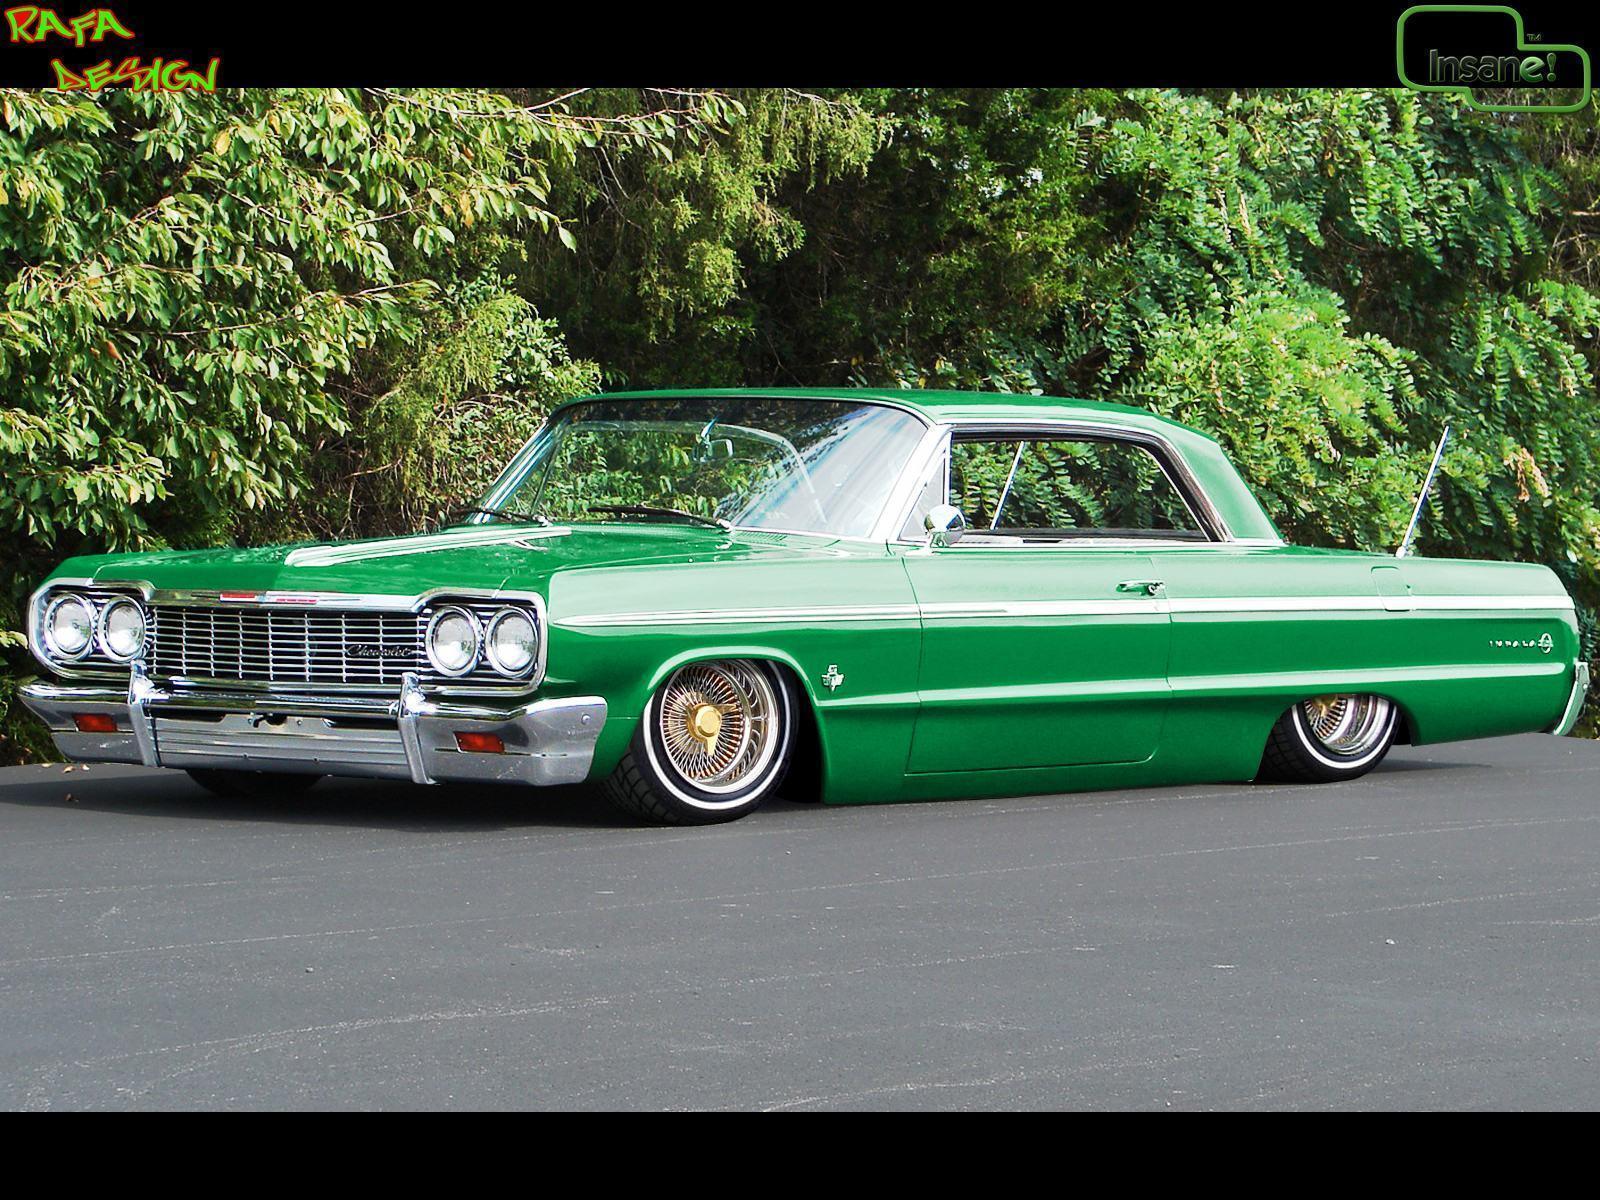 Lowrider Wallpaper Discover more Car colorful Designs Customized  Vehicles Hydraulic Lowered Body wallpapers ht  Sky aesthetic Lowriders  Landscape wallpaper